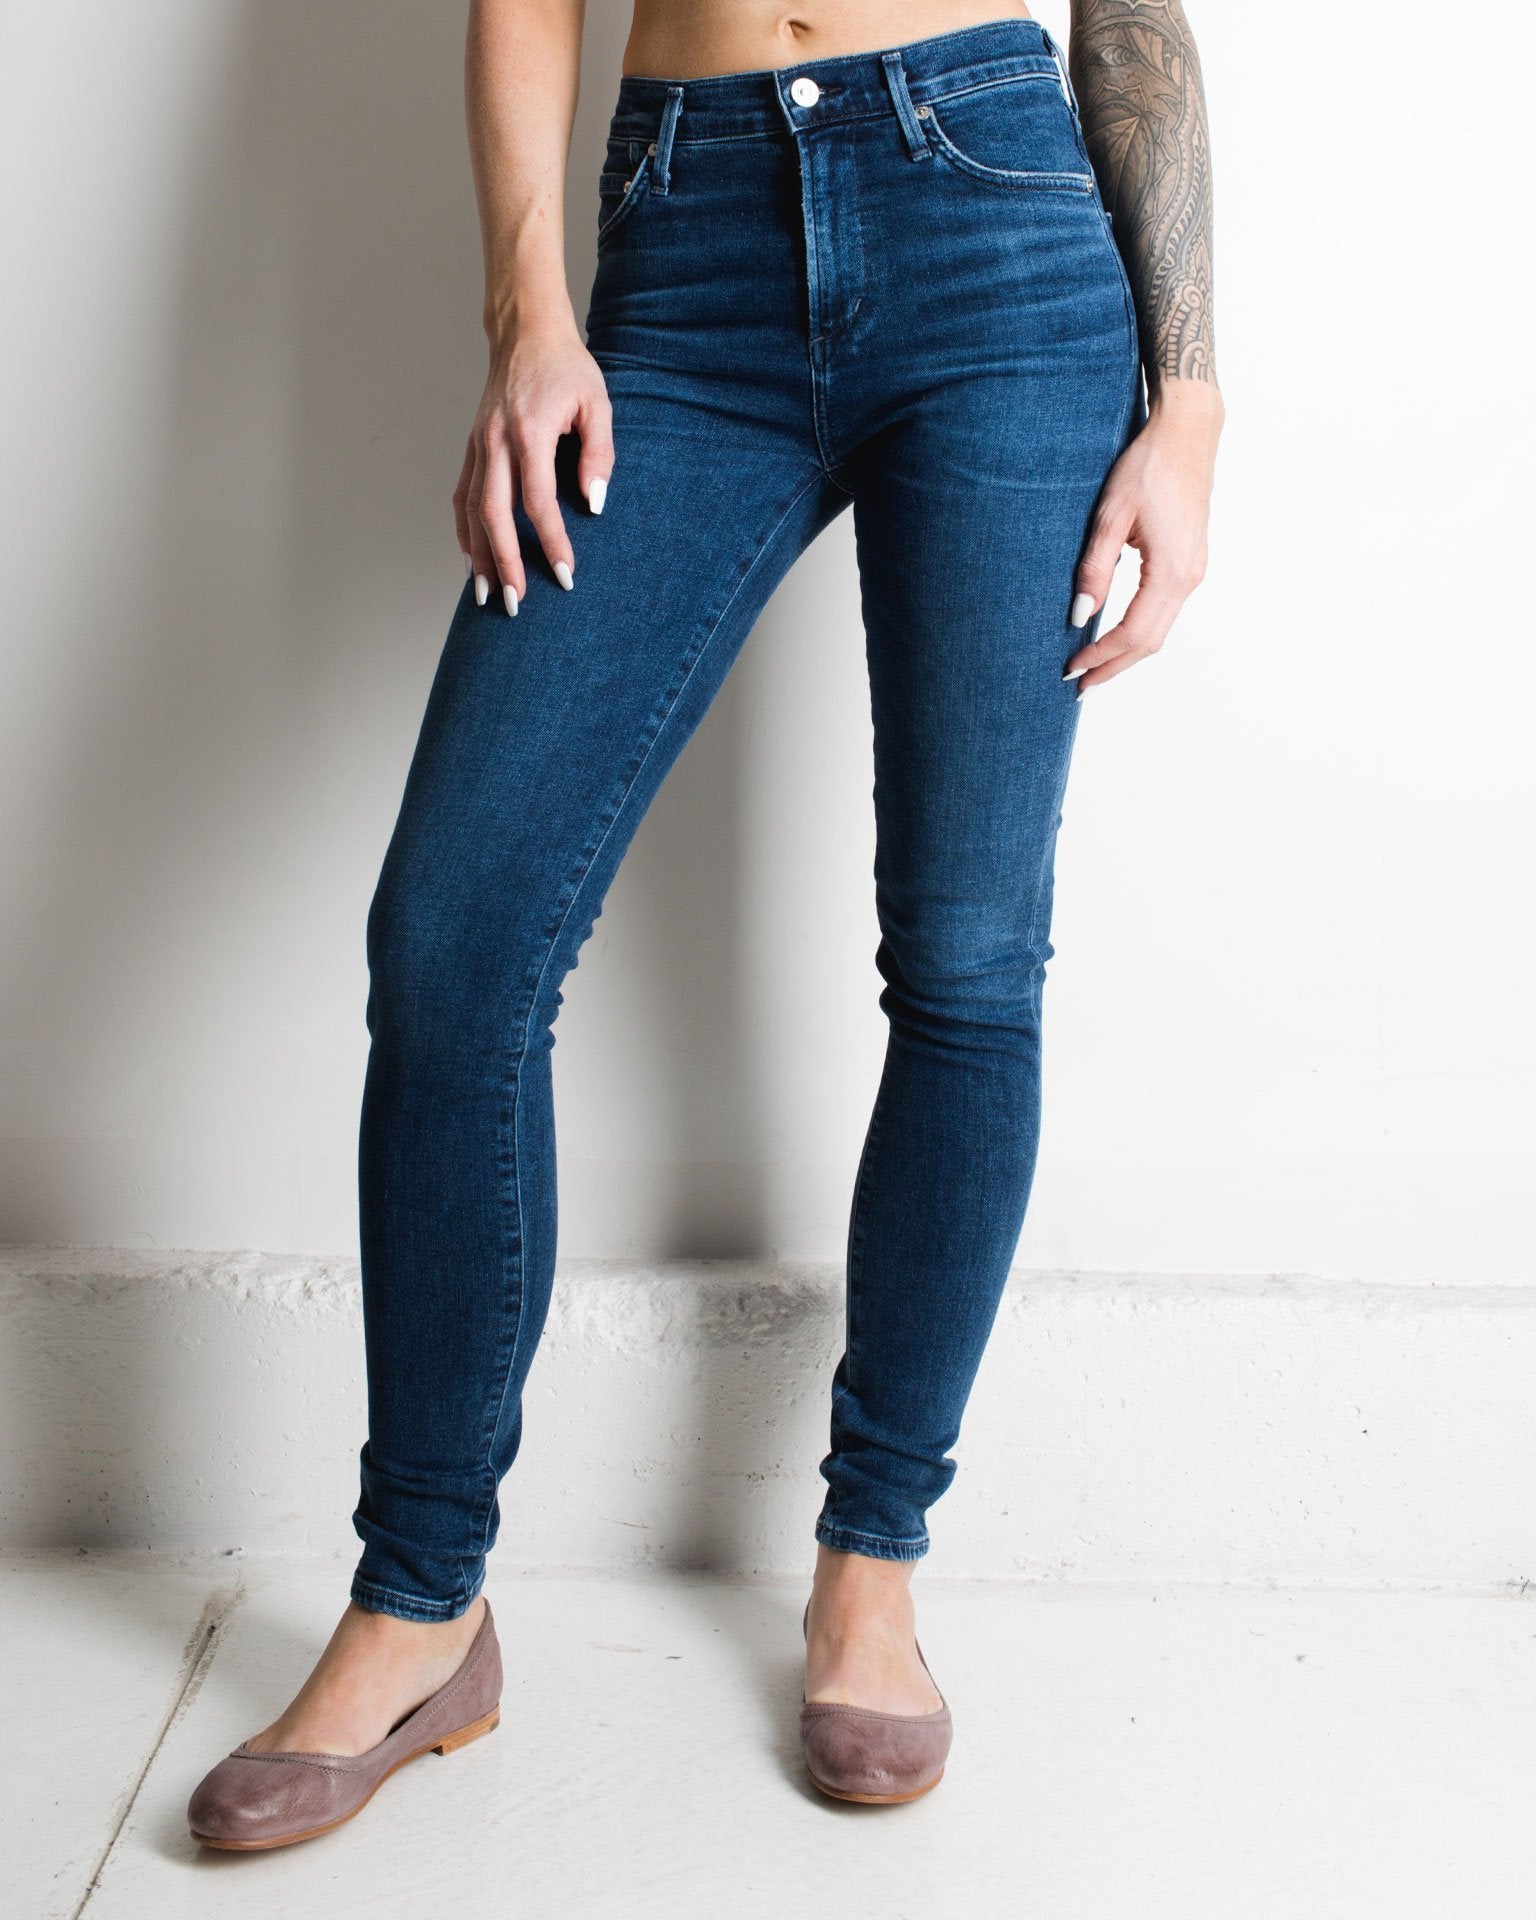 citizens of humanity rocket skinny jeans